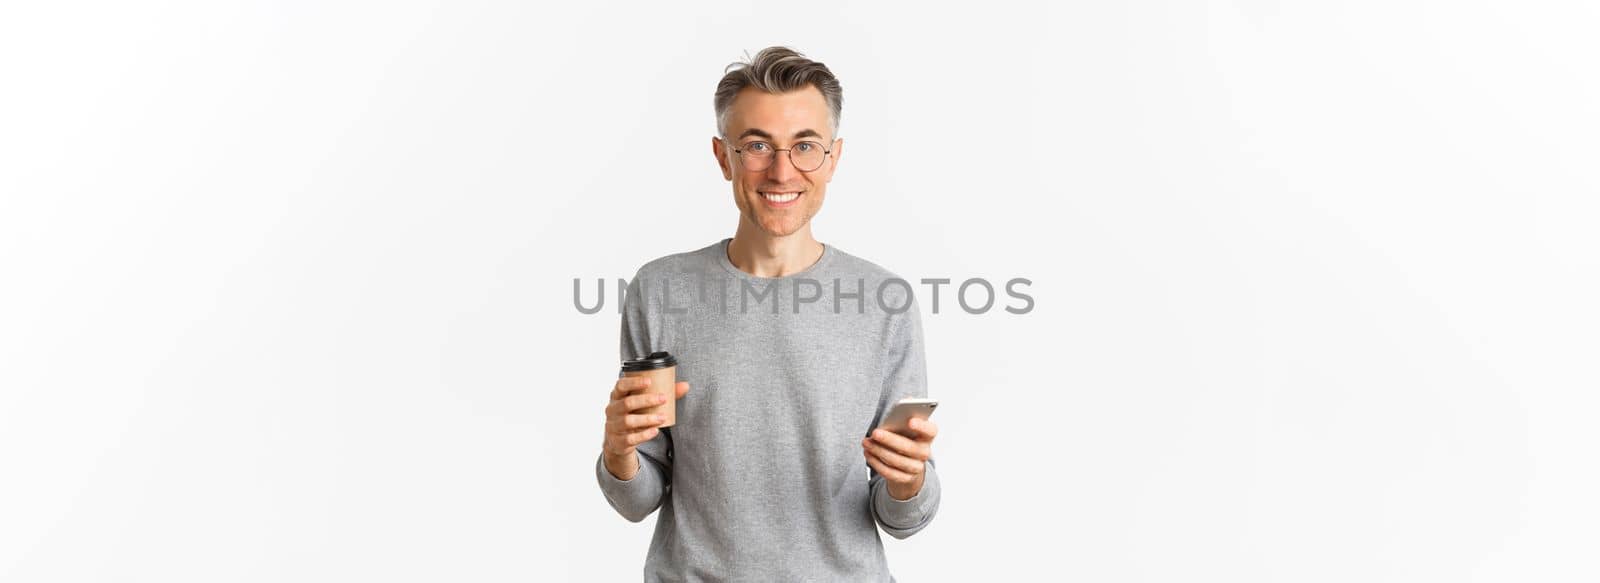 Handsome middle-aged man in grey sweater and glasses, smiling happy, drinking coffee and using mobile phone, standing over white background.